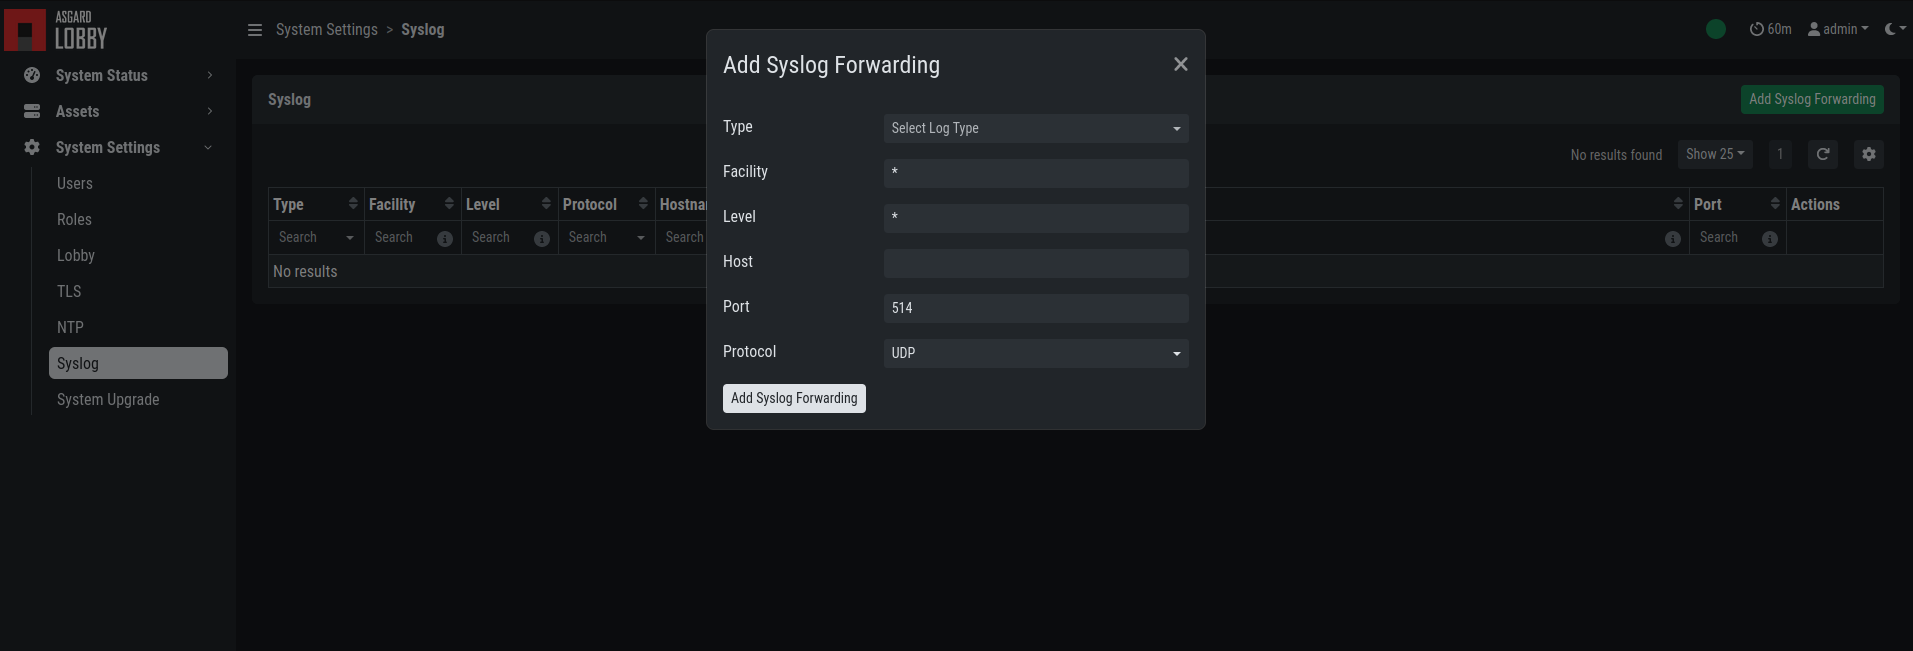 The Syslog Settings